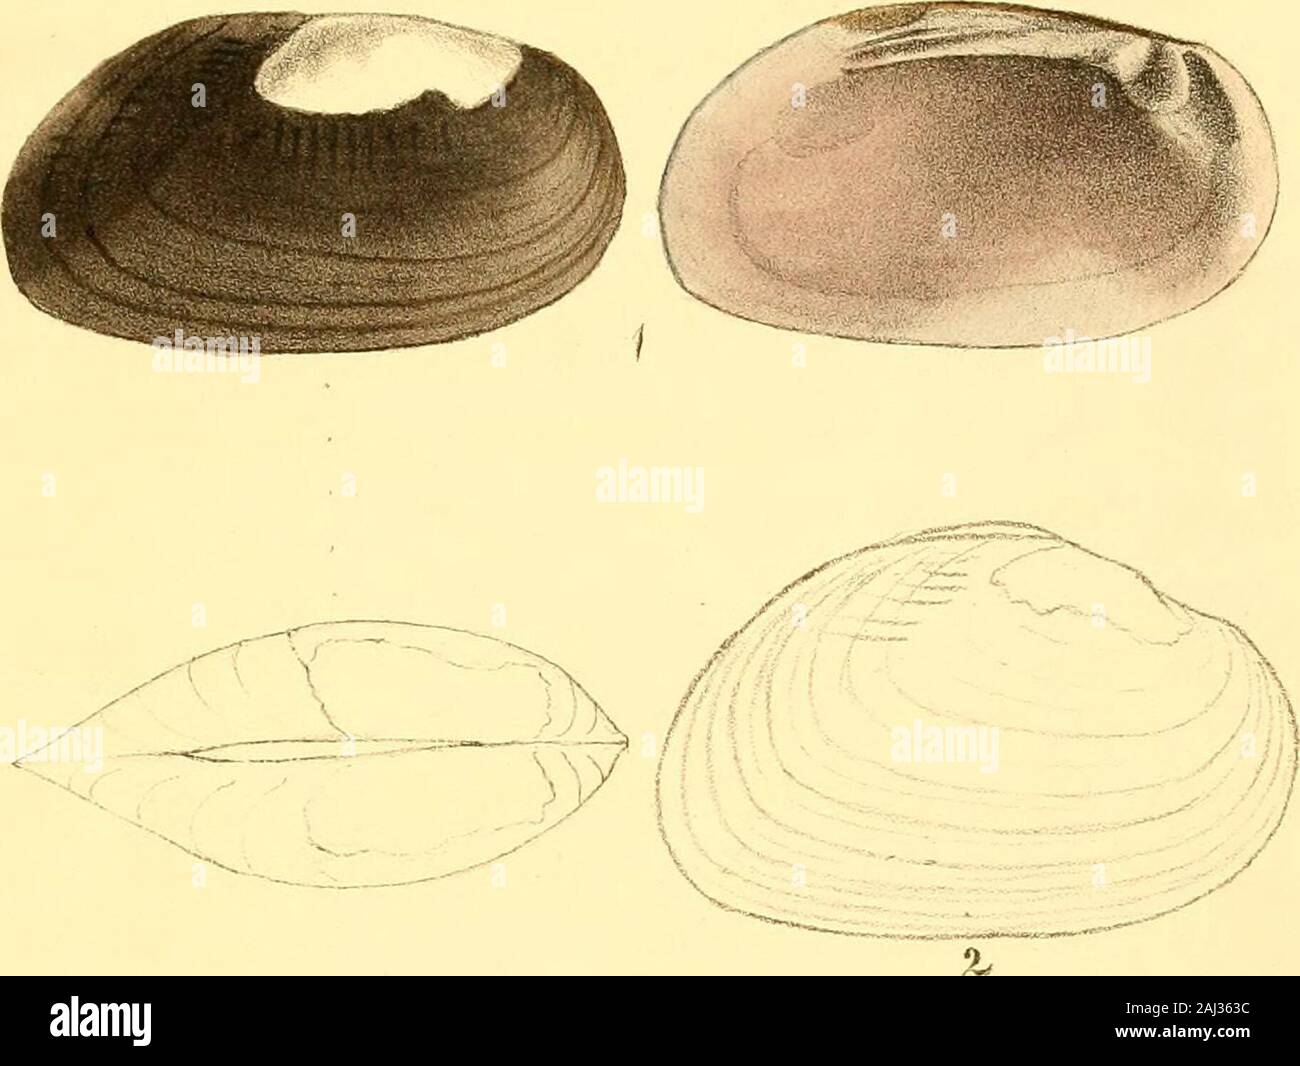 Monography of the family Unionidæ : or, Naiades of Lamarck (fresh water bivalve shells) of North America ... . NIO HETERODON. Plate XLIX.—Fig. 3. DESCRIPTION. Shell rhomboidal-ovate, ventricose, valves thin;ligament margin short, elevated, parallel with thebasal margin; umbonial slope rounded; beaks decor-ticated; basal margin straight in the middle; posteriorextremity rounded or very obtusely angulated, a littleabove the line of the base; within bluish; cardinaltooth in the left valve trilobed; in the right valve,single, elongated, oblique, compressed; lateral teethslightly curved, double in Stock Photo